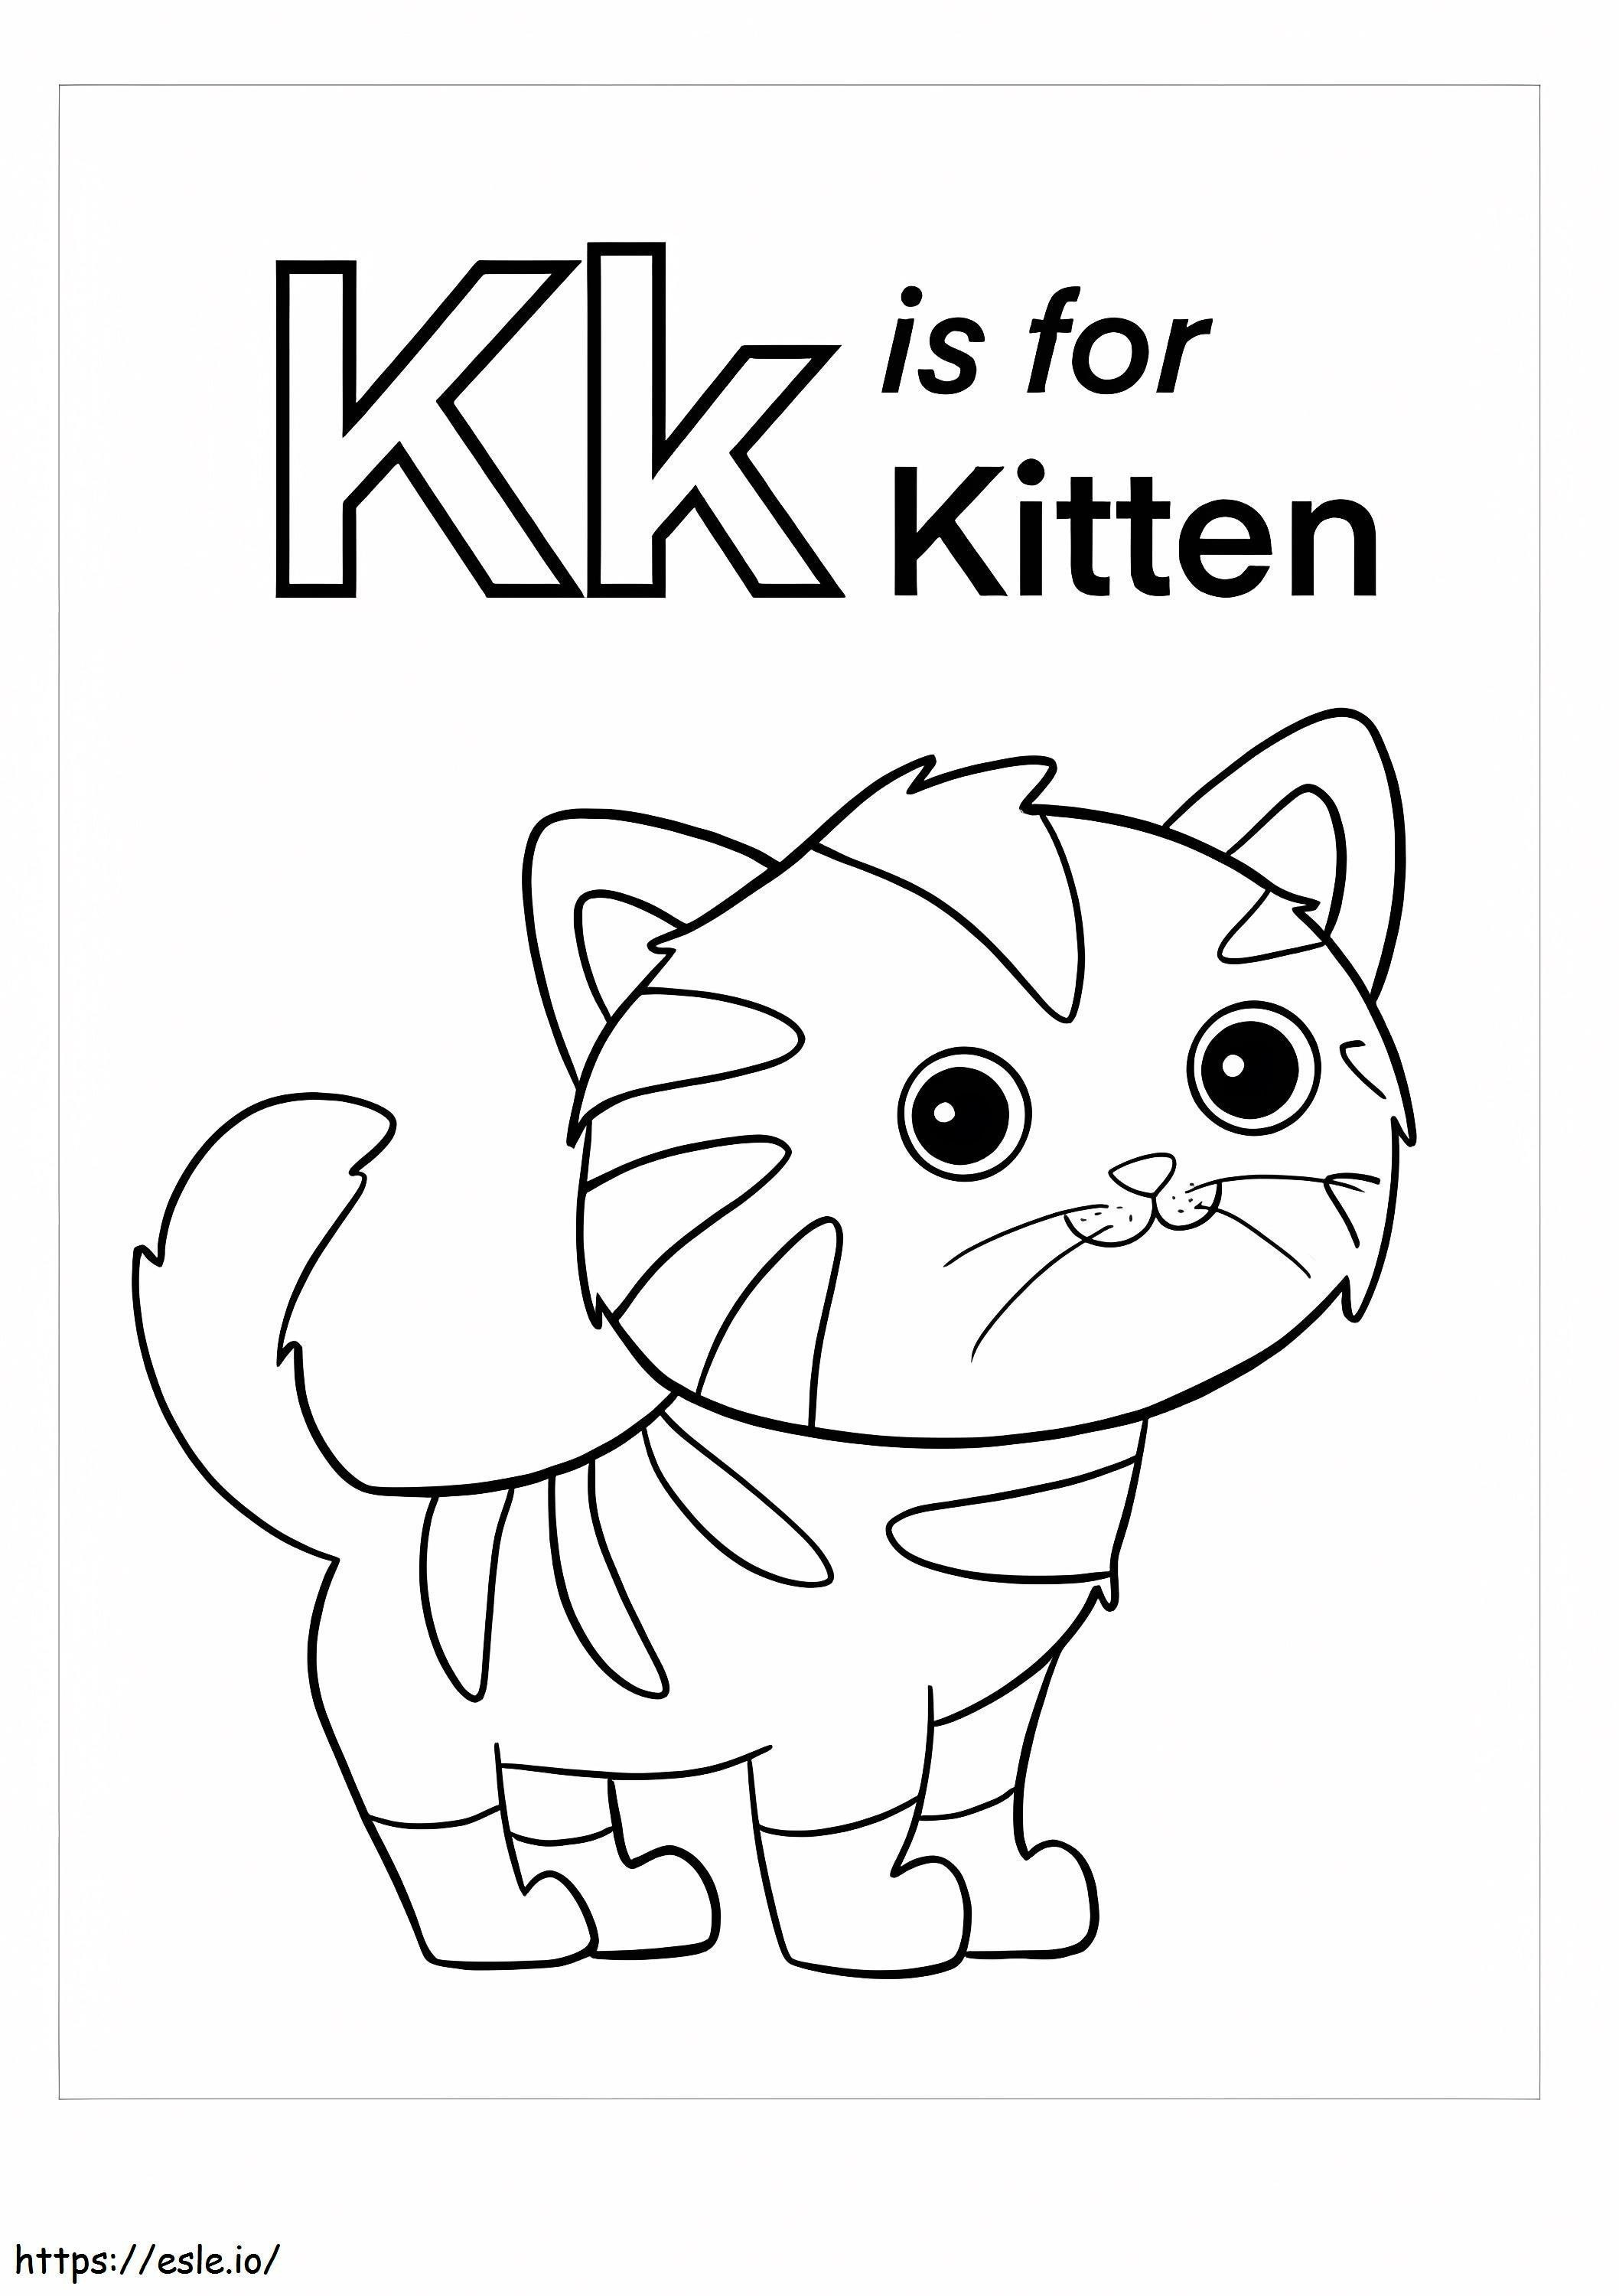 K Is For Kitten coloring page